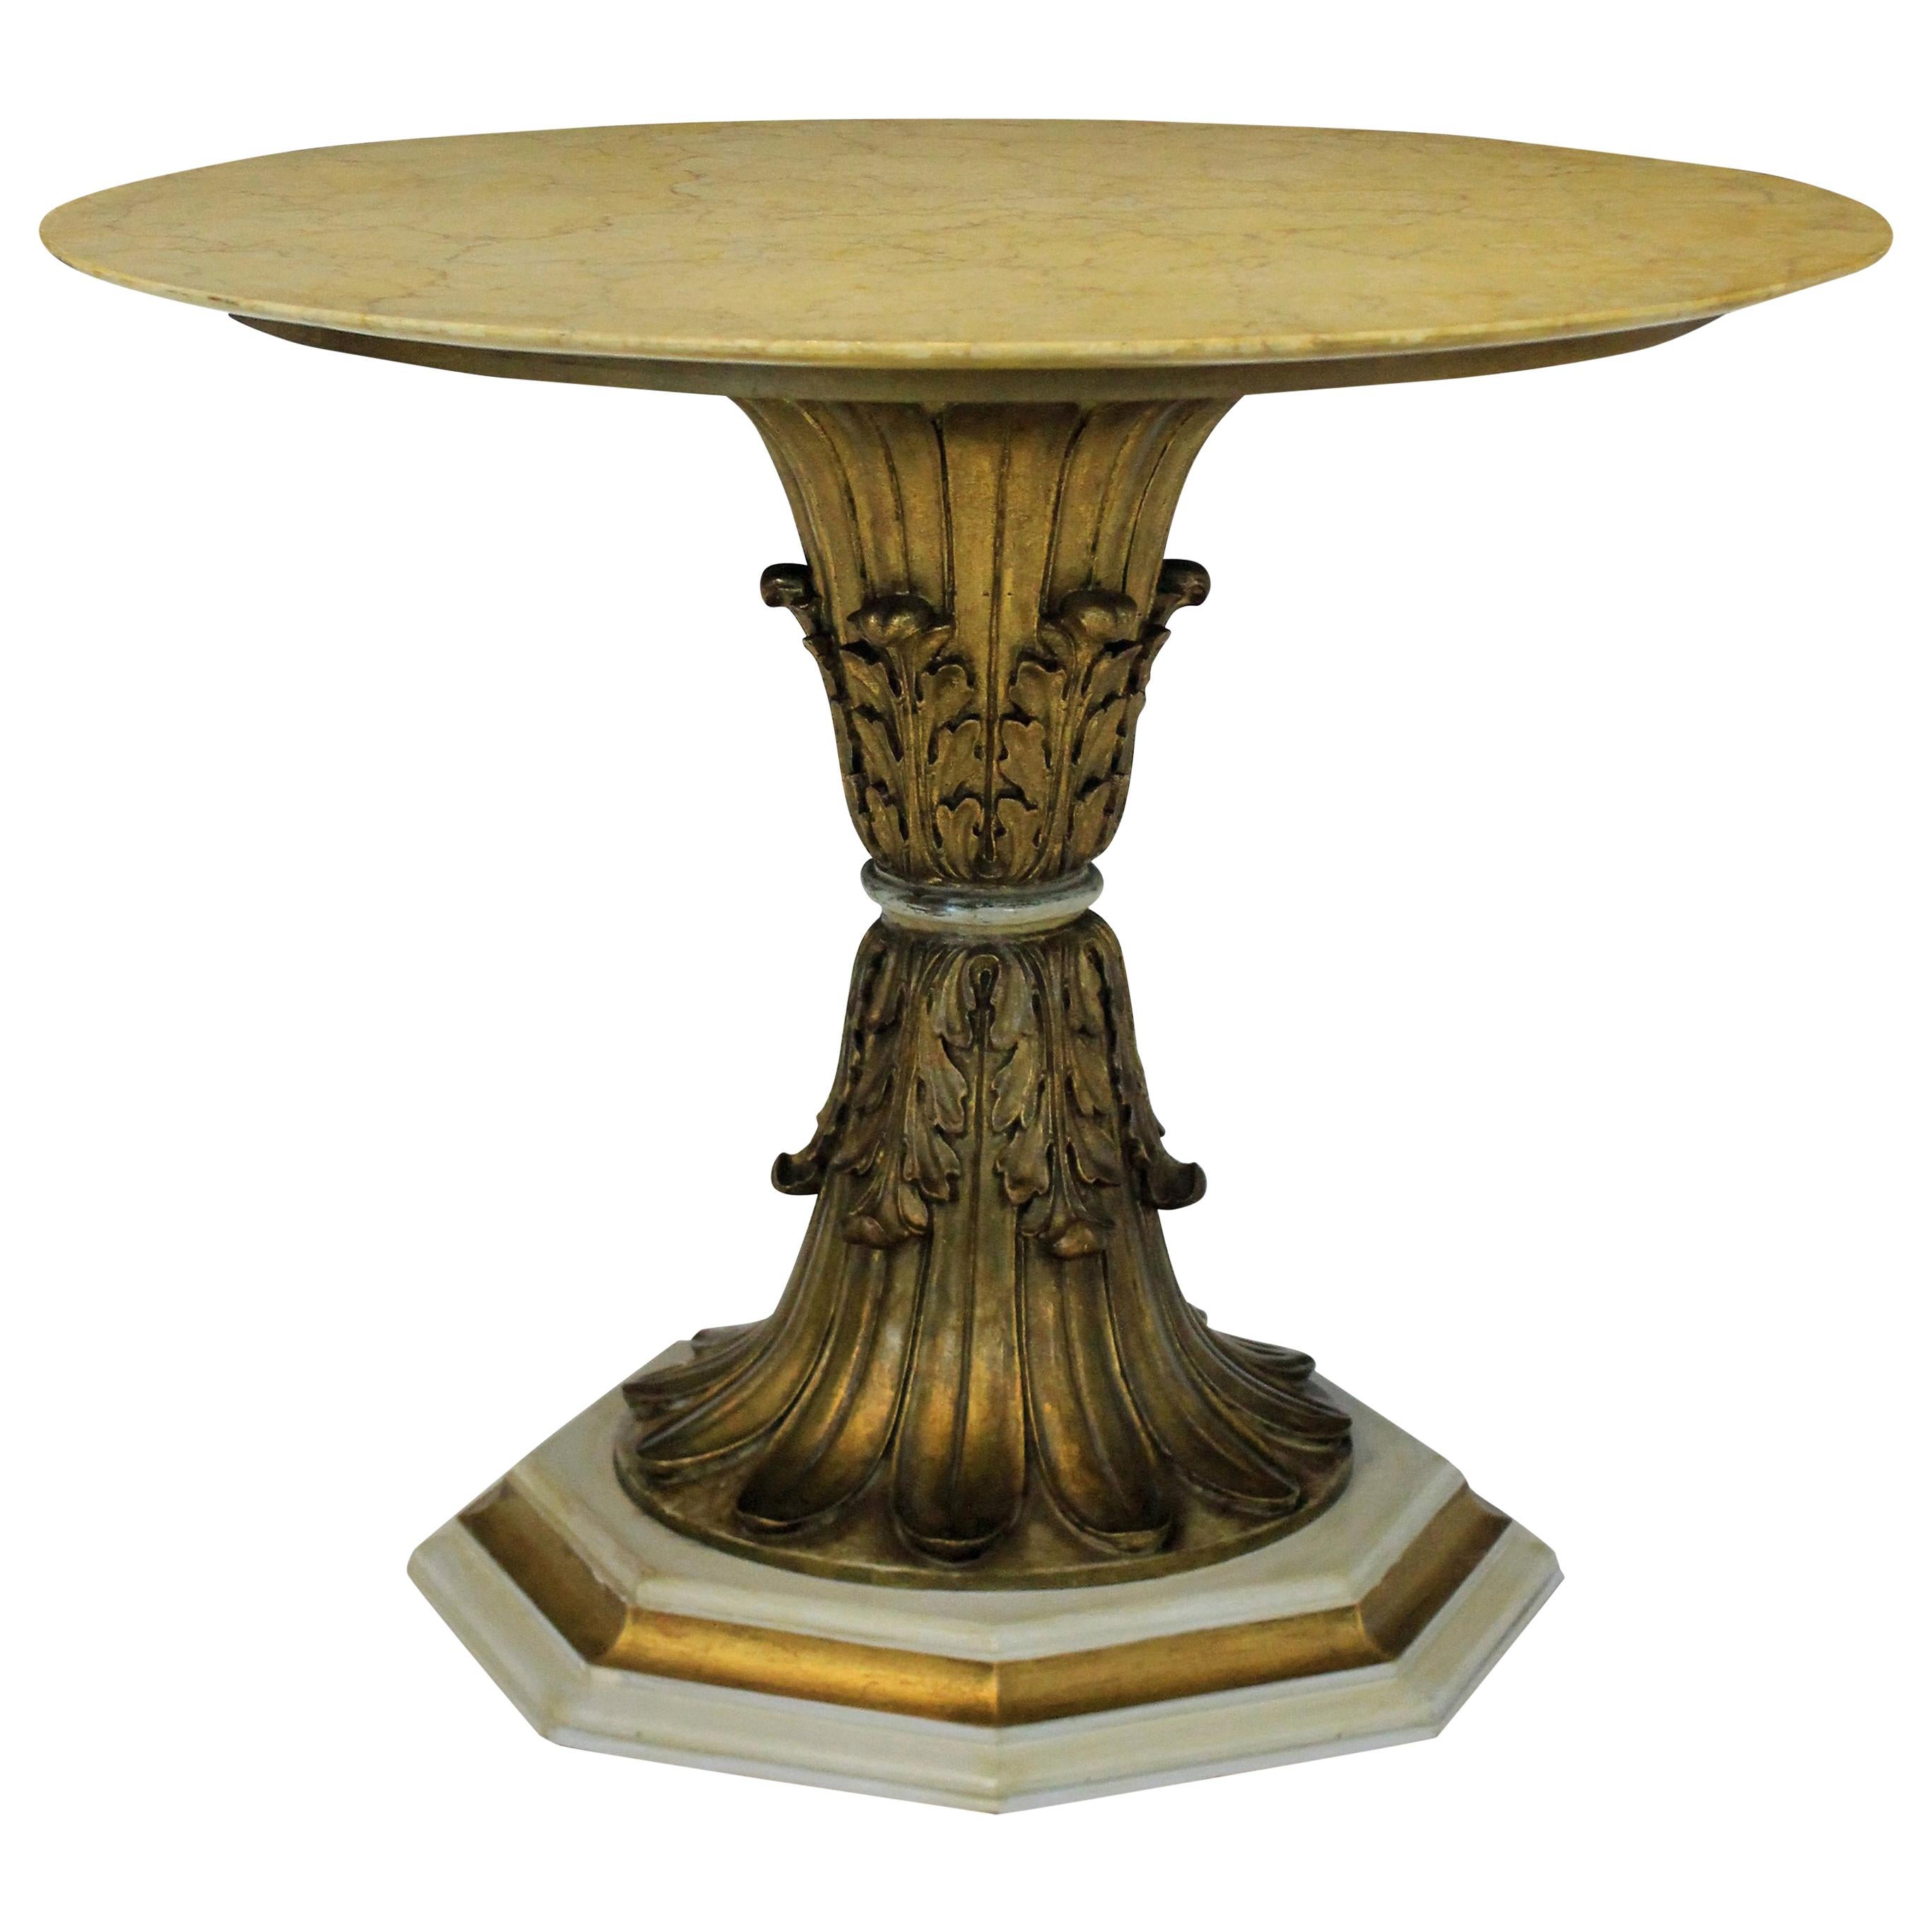 An Italian finely carved giltwood centre table depicting acanthus leaves with a circular sienna marble top.

                